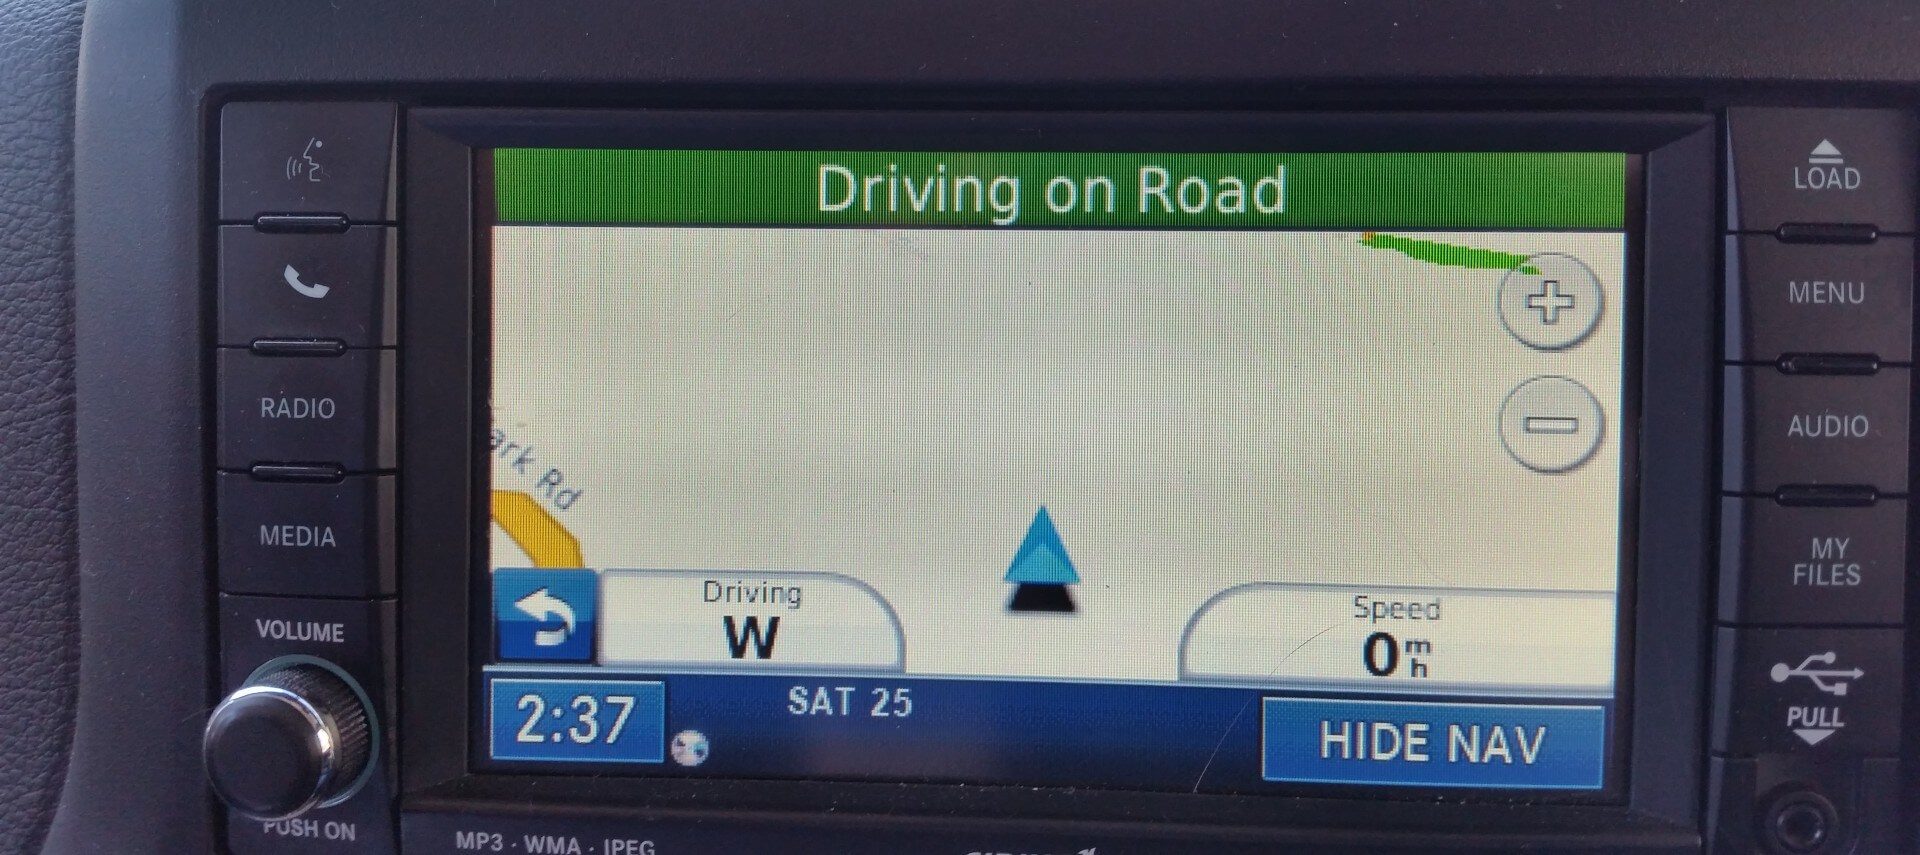 View of a GPS screen of a car